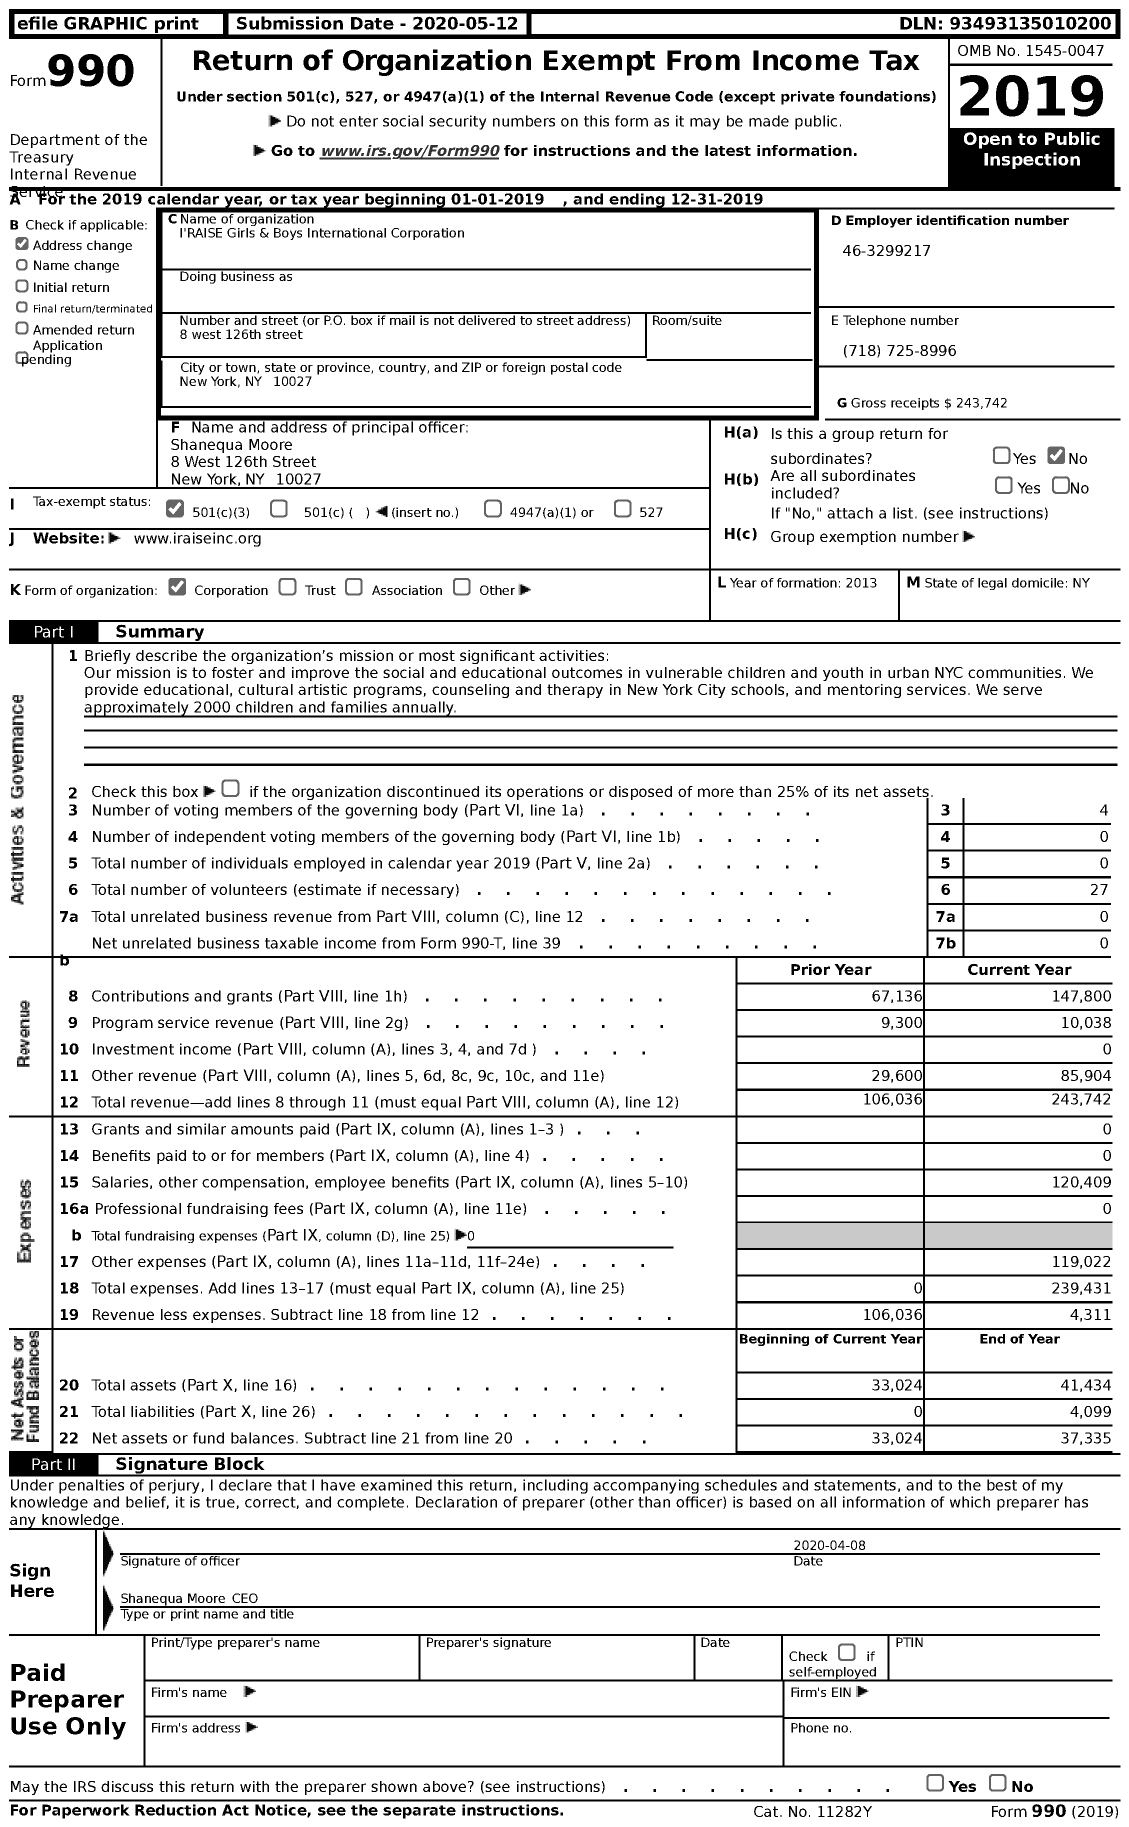 Image of first page of 2019 Form 990 for Iraise Girls and Boys International Corporation